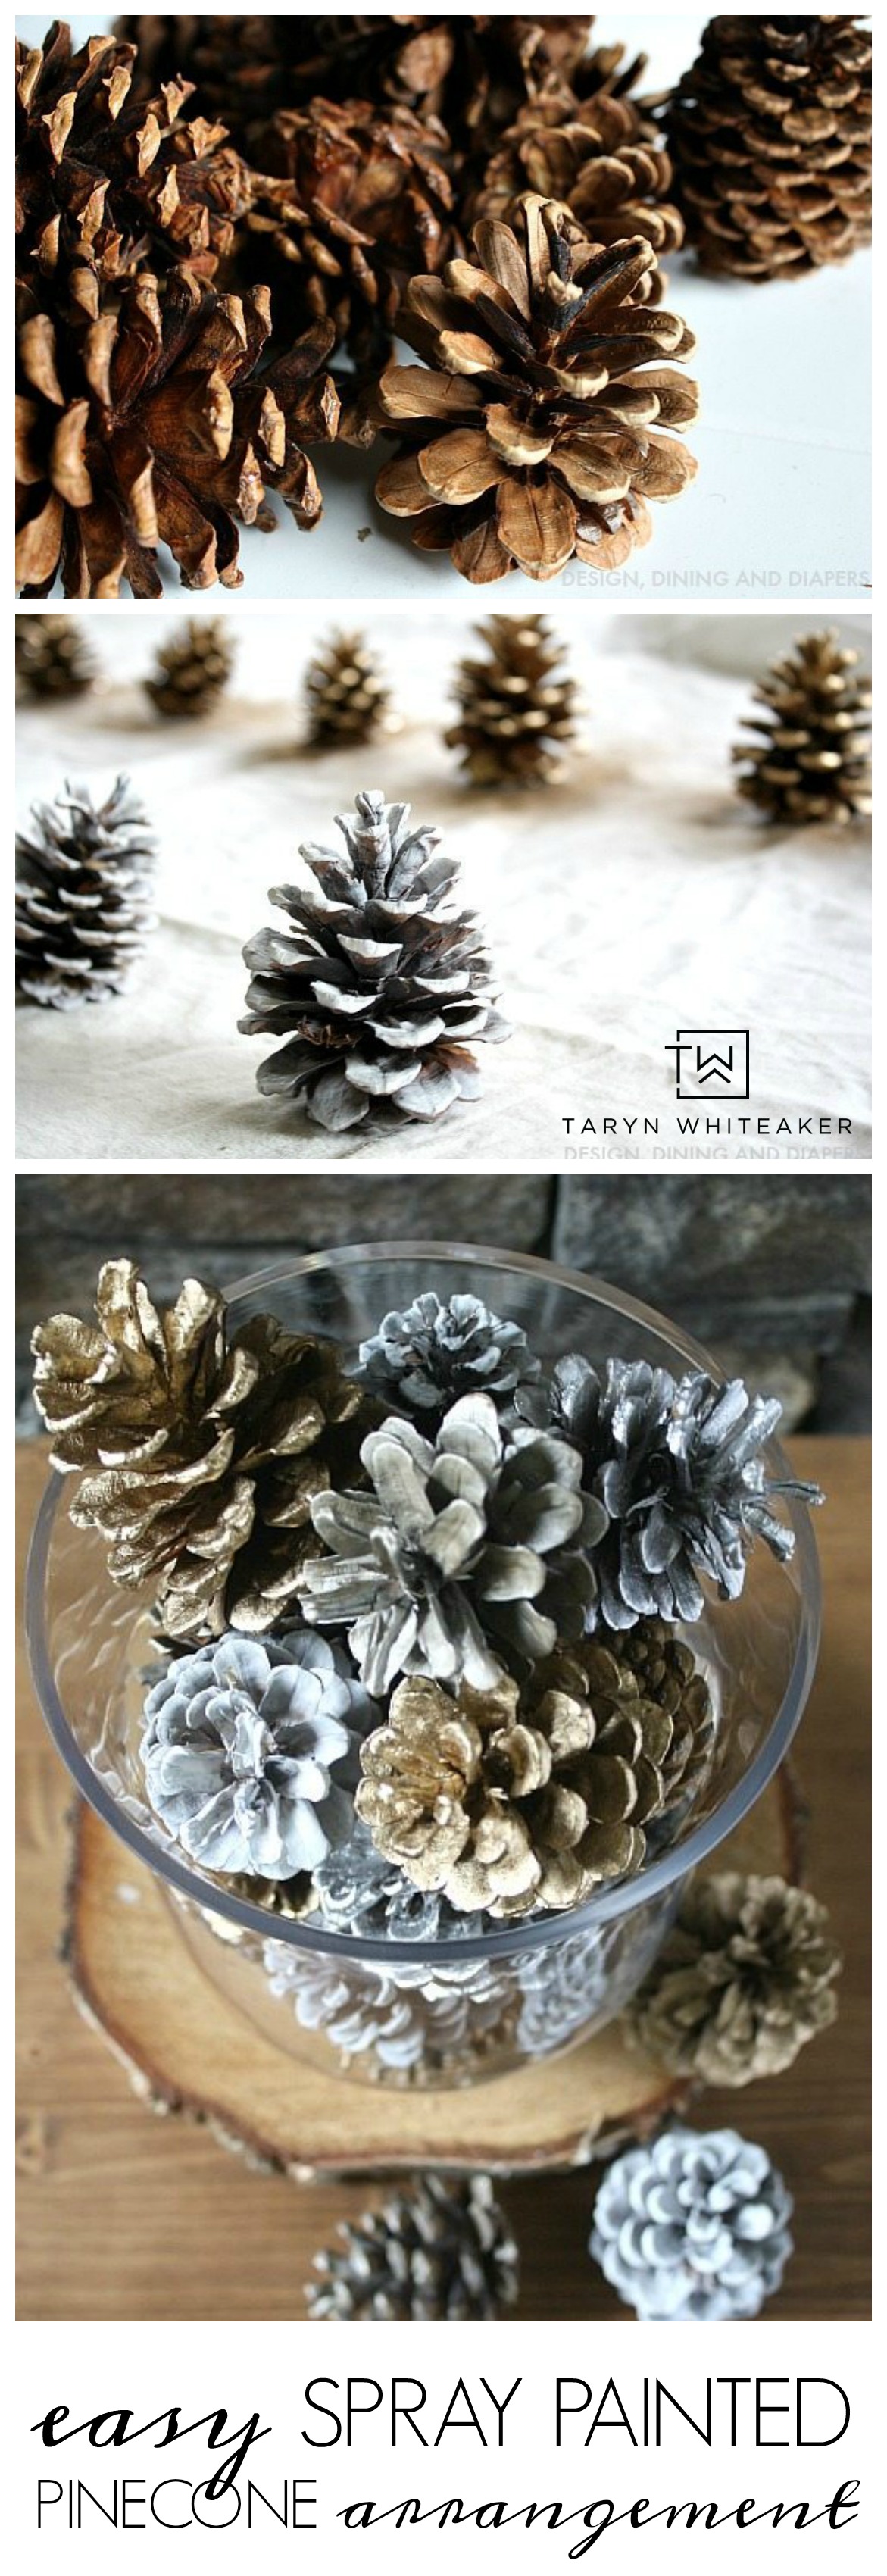 Quick Holiday Decor: Spray Painted Pine Cones - Taryn Whiteaker